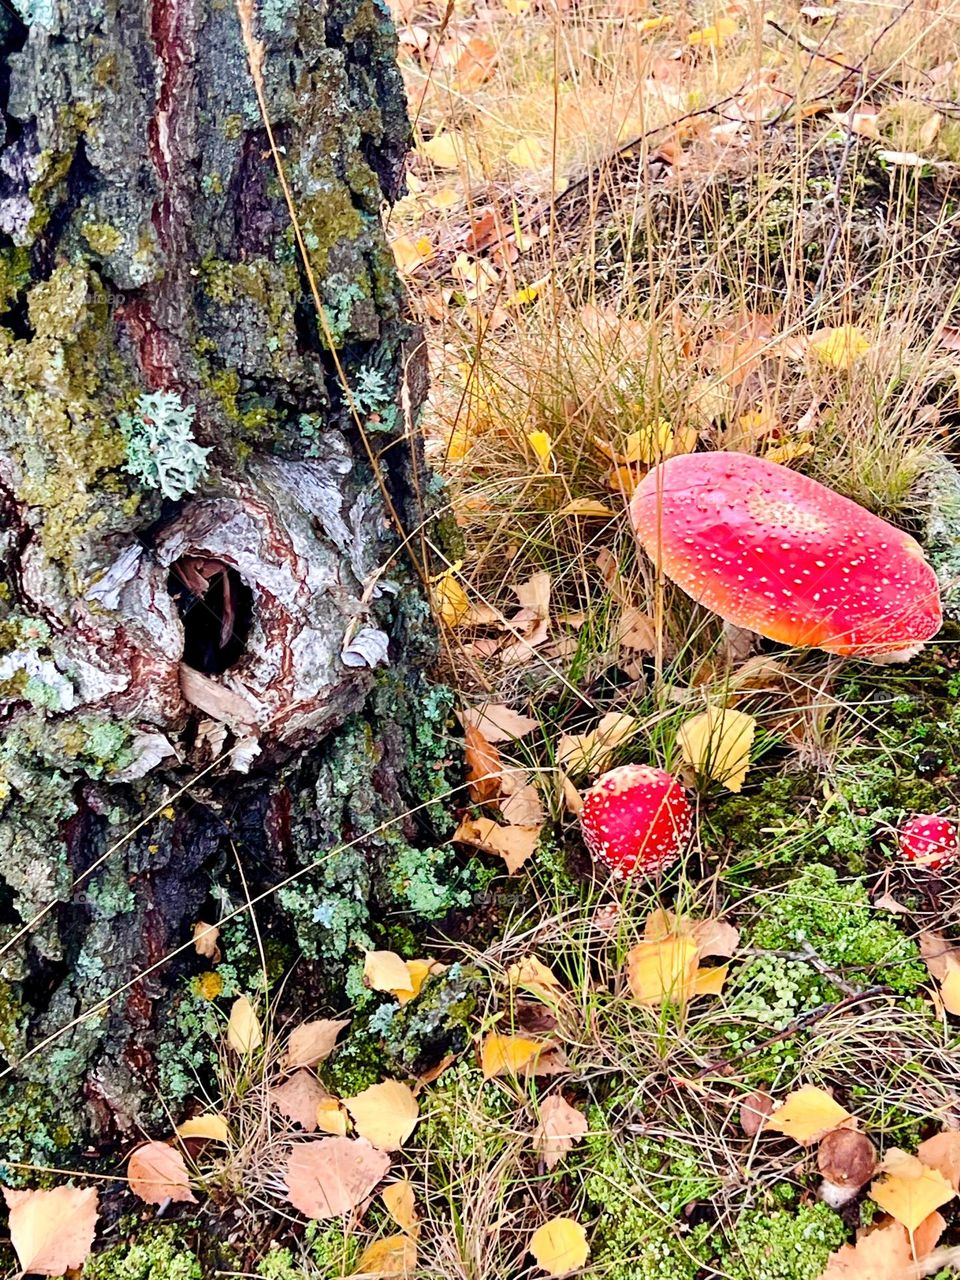 Red mushrooms growing by the foot of the tree 